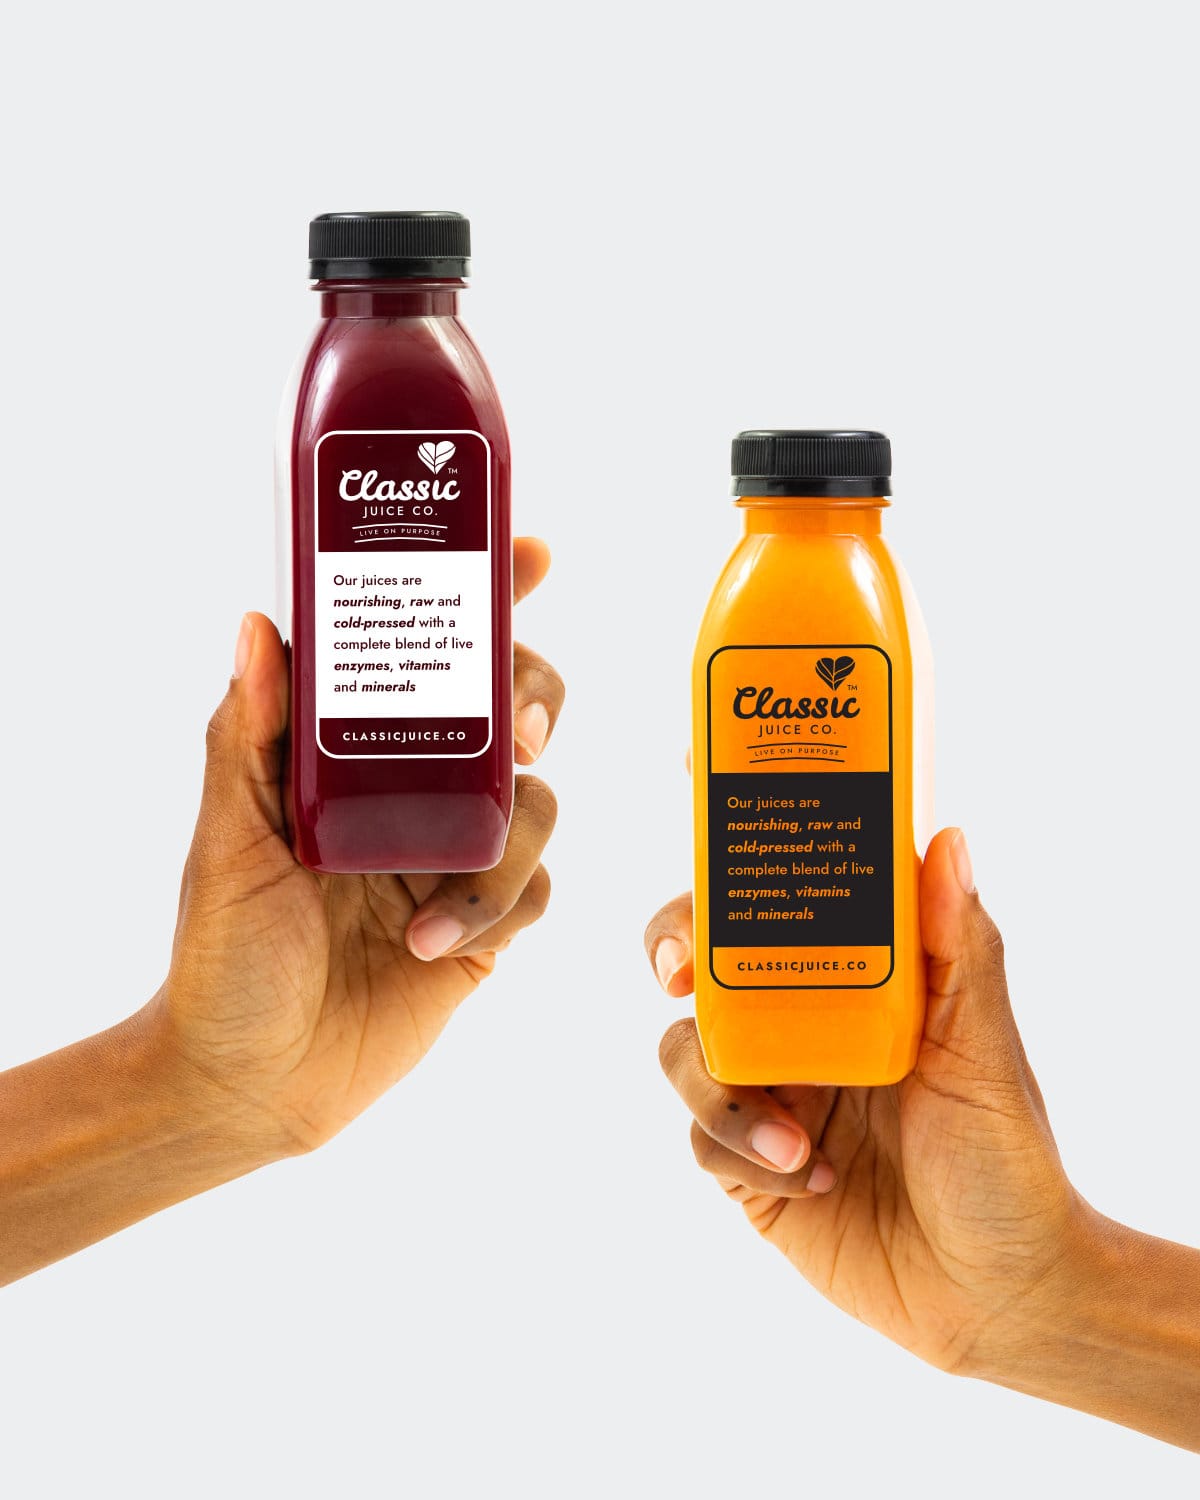 Two hands, each holding a different Classic cleansing juice. One orange and one beetroot colour. The hands and juices are set against a pale grey background.